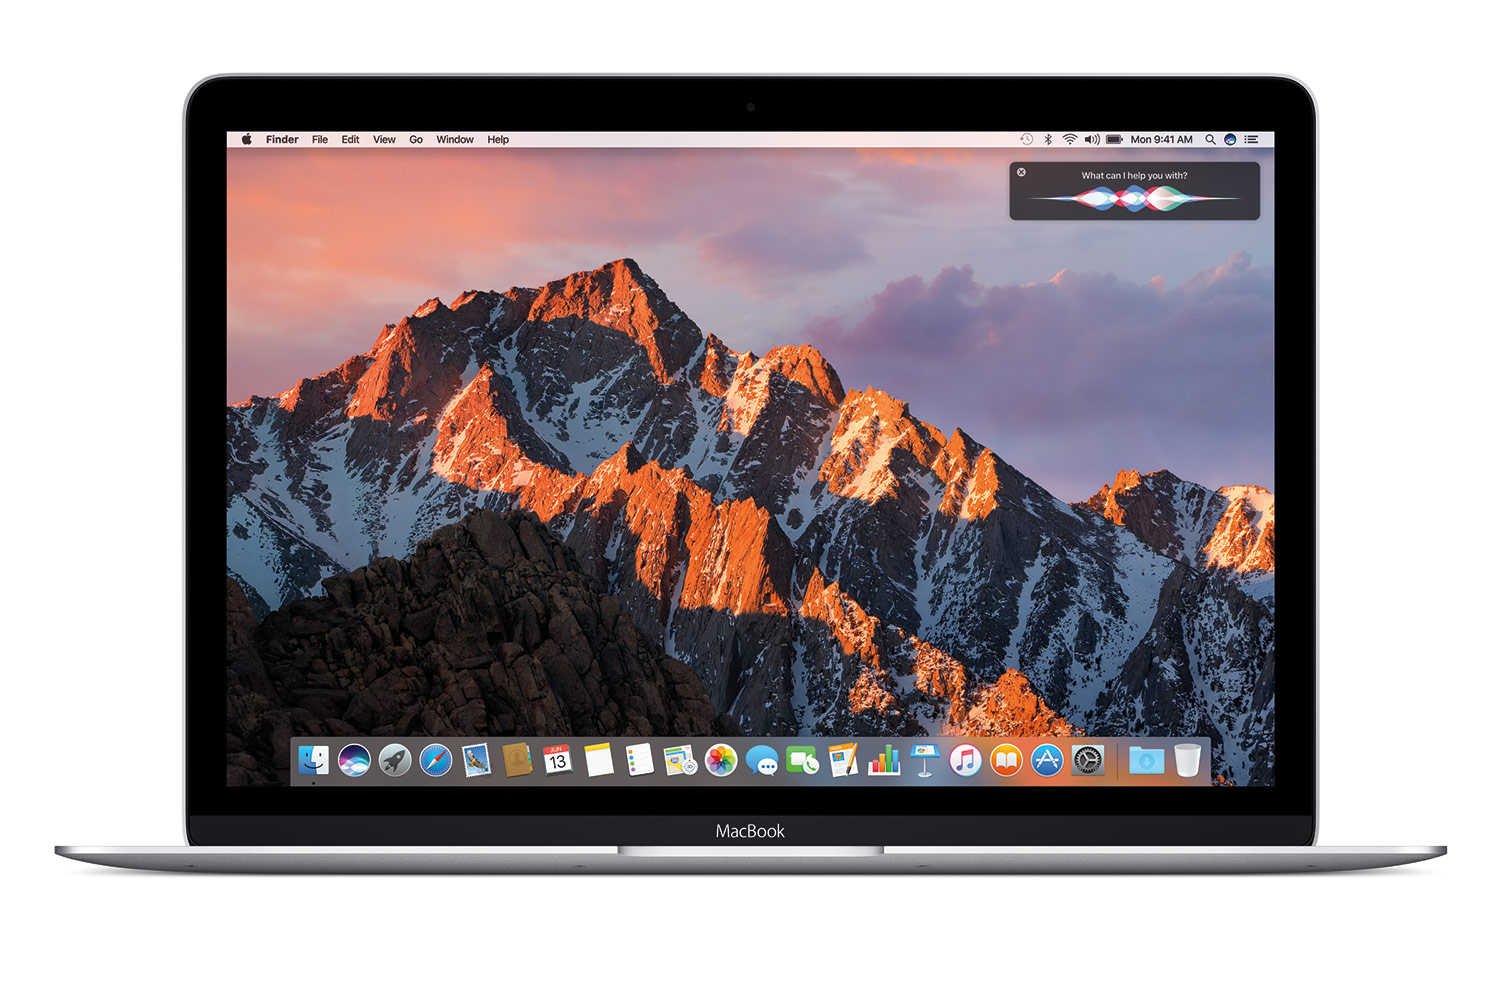 os x name change to macos and first version macossierra 005